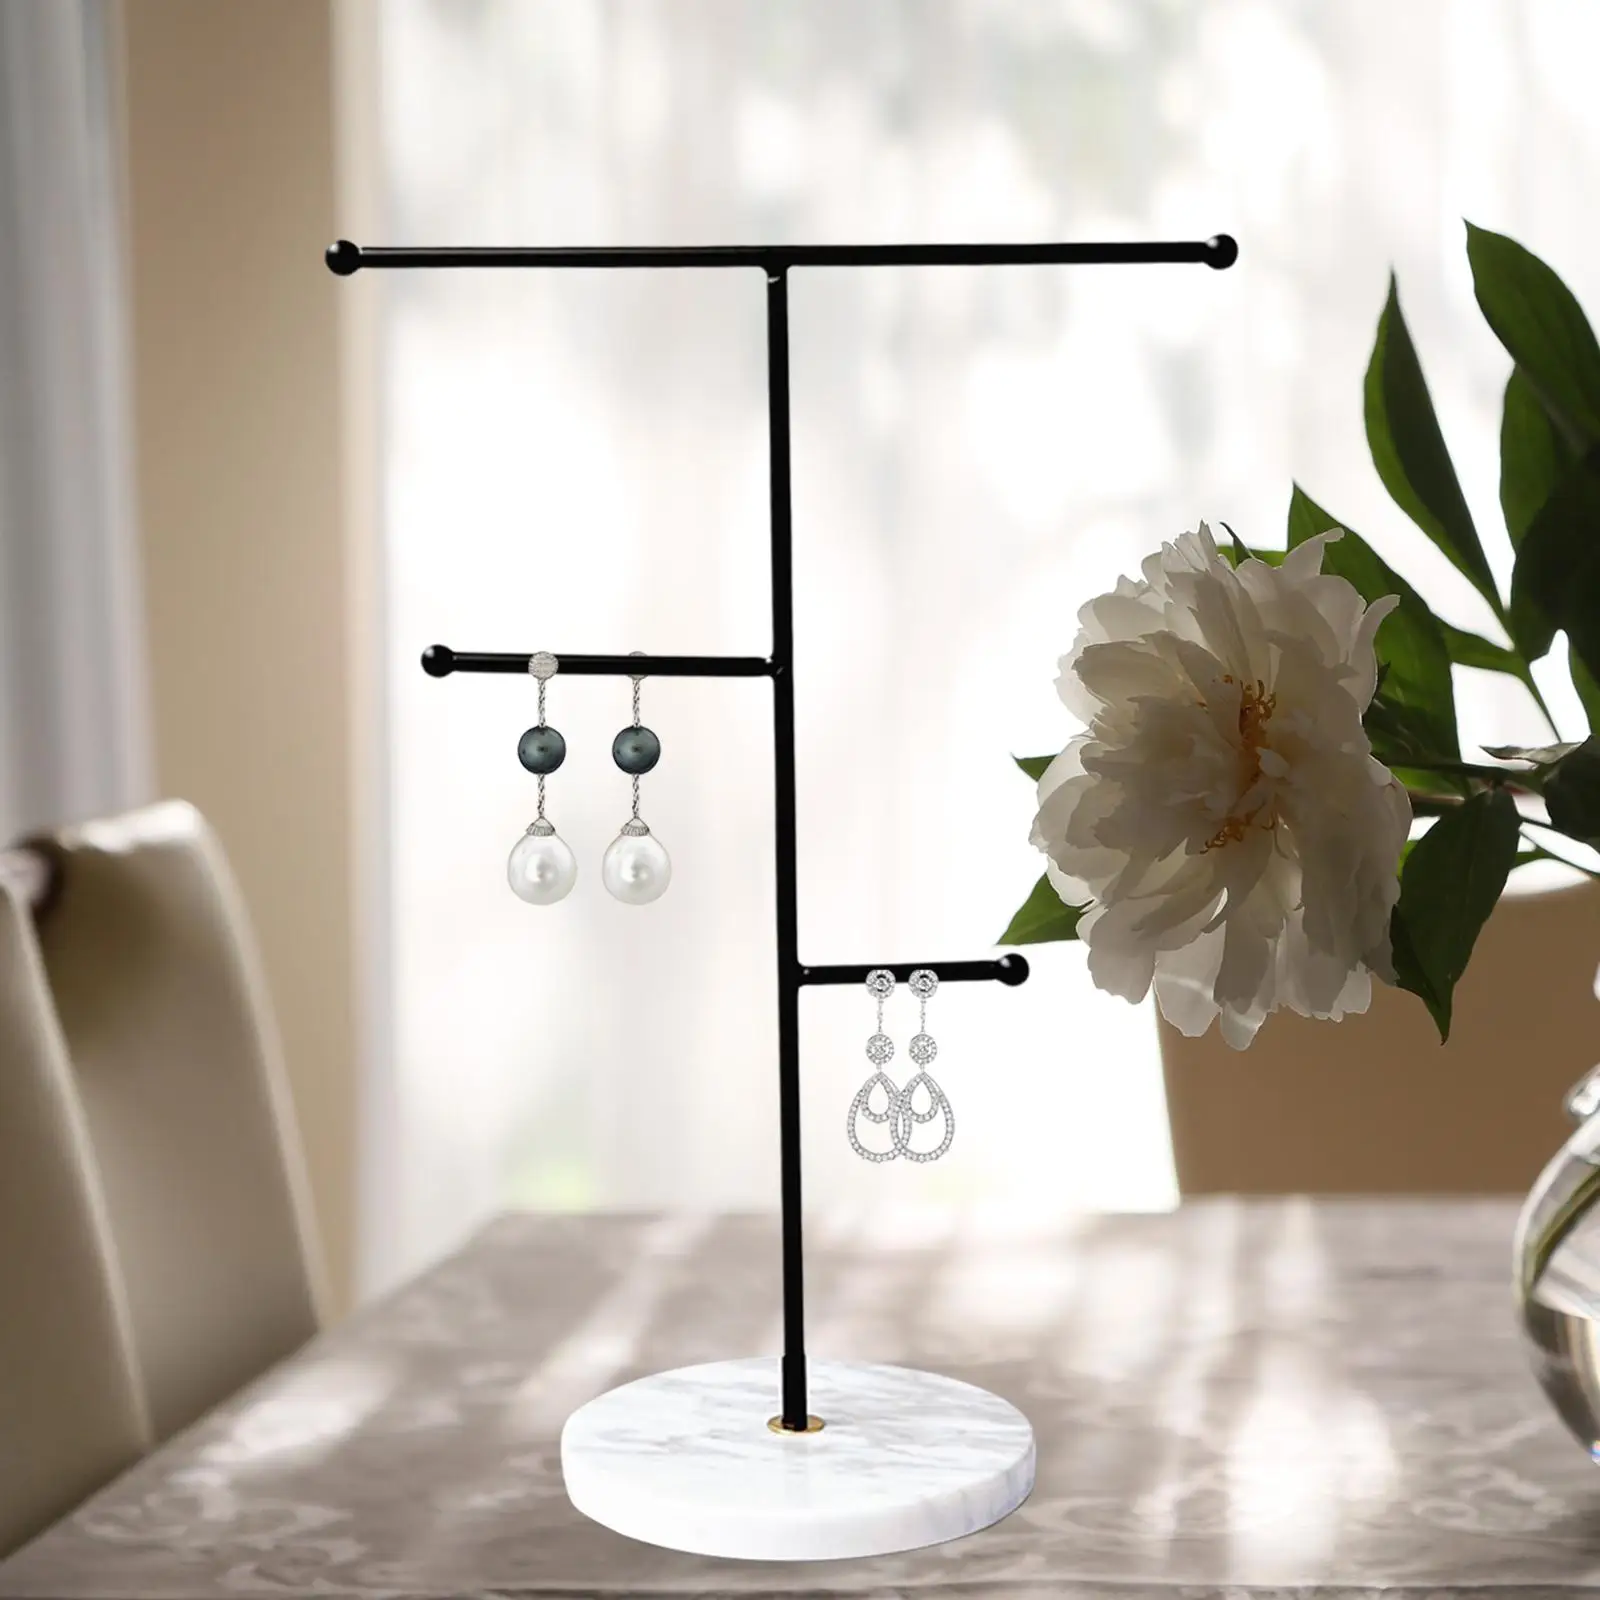 3 Layer Jewelry Display Necklace Holder Stand Earring Display Stand Show Rack Holder Jewelry Necklace Rack Organizer